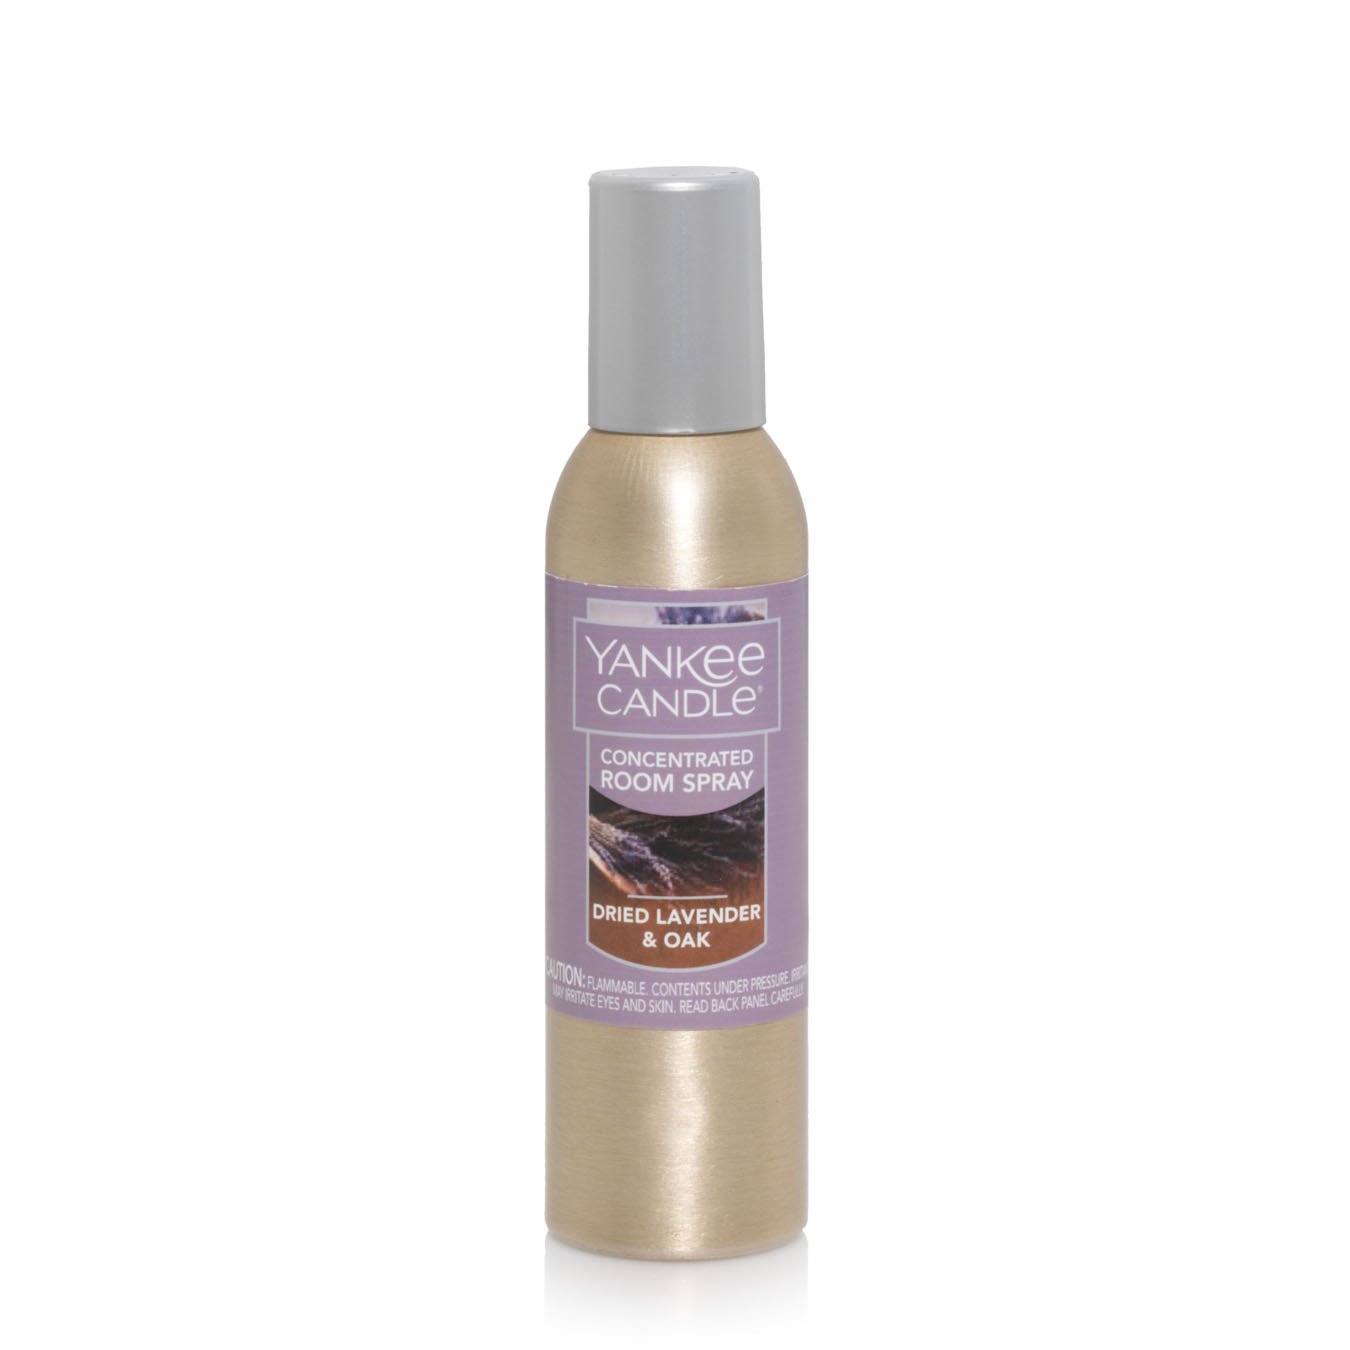 Yankee Candle Dried Lavender and Oak Concentrated Room Spray